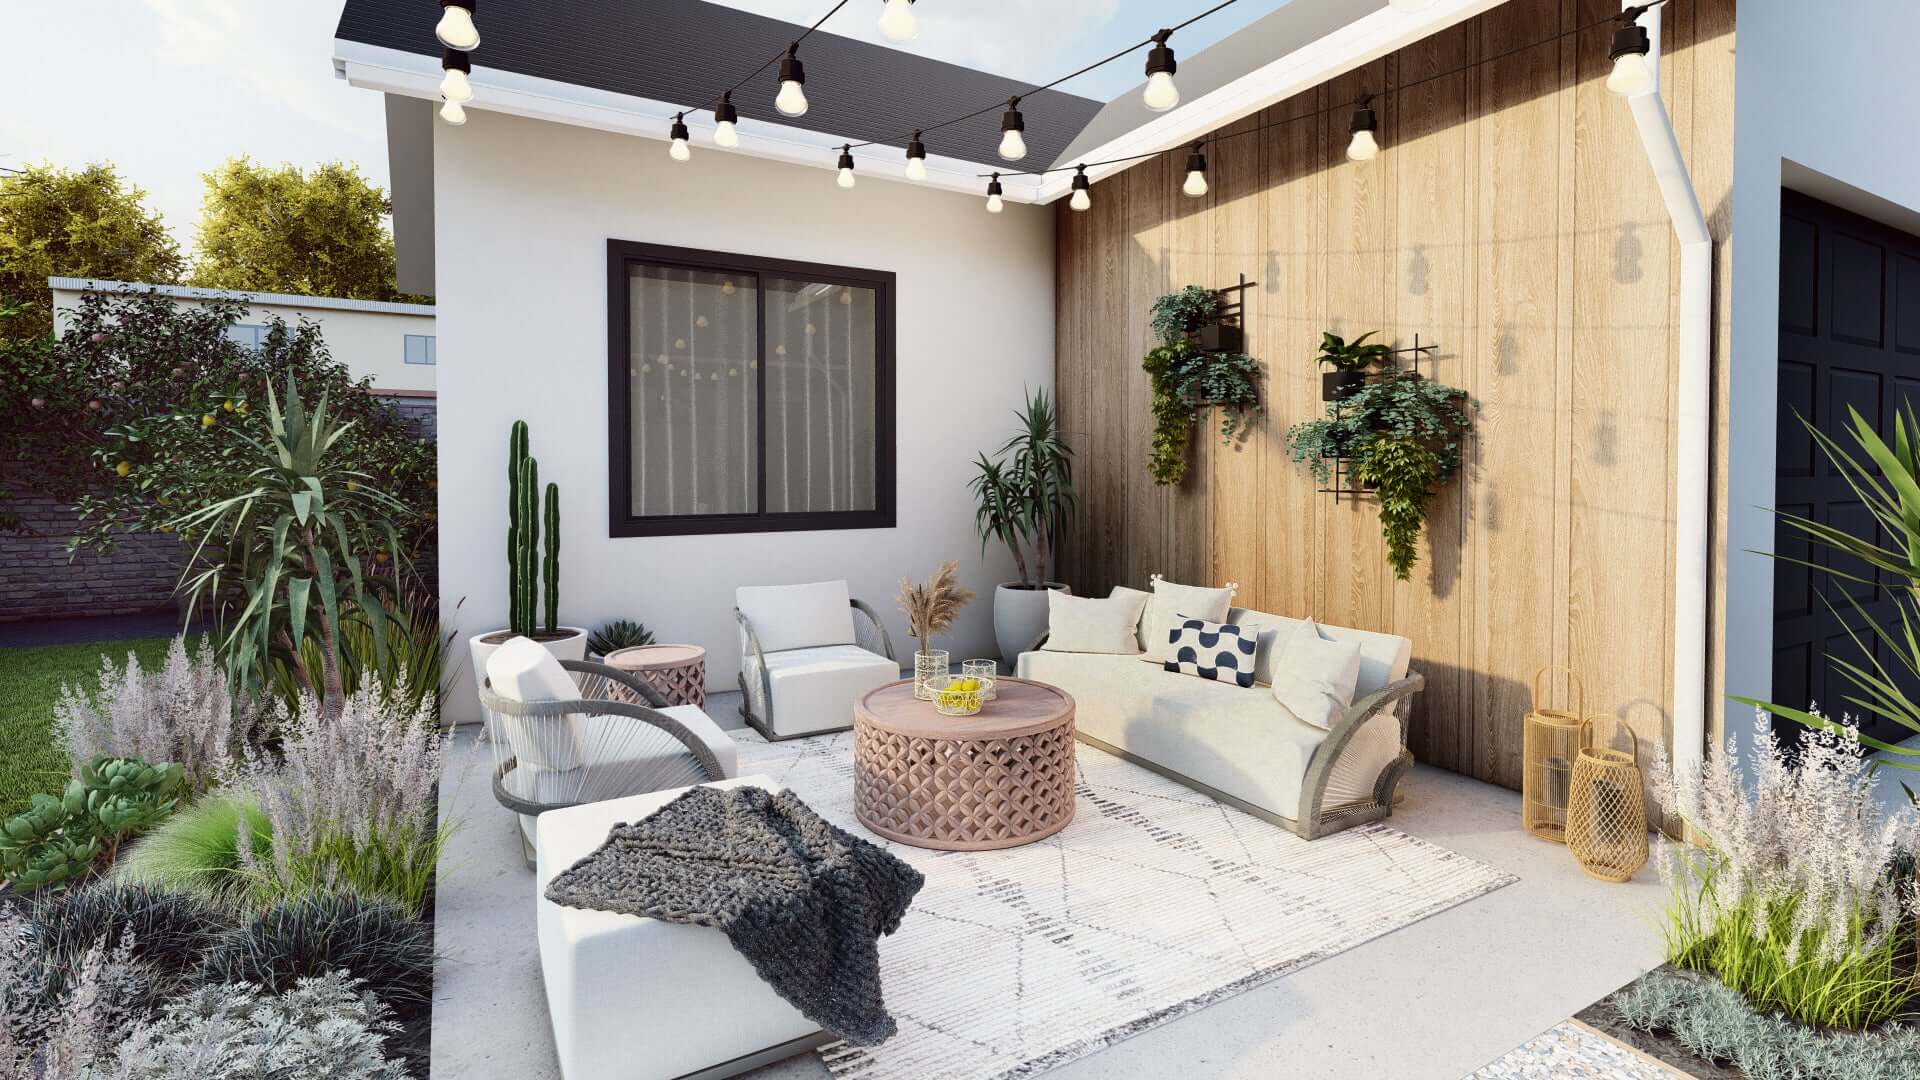 a backyard seating area with a couch, lounge chairs, and wall planters against a wooden accent wall